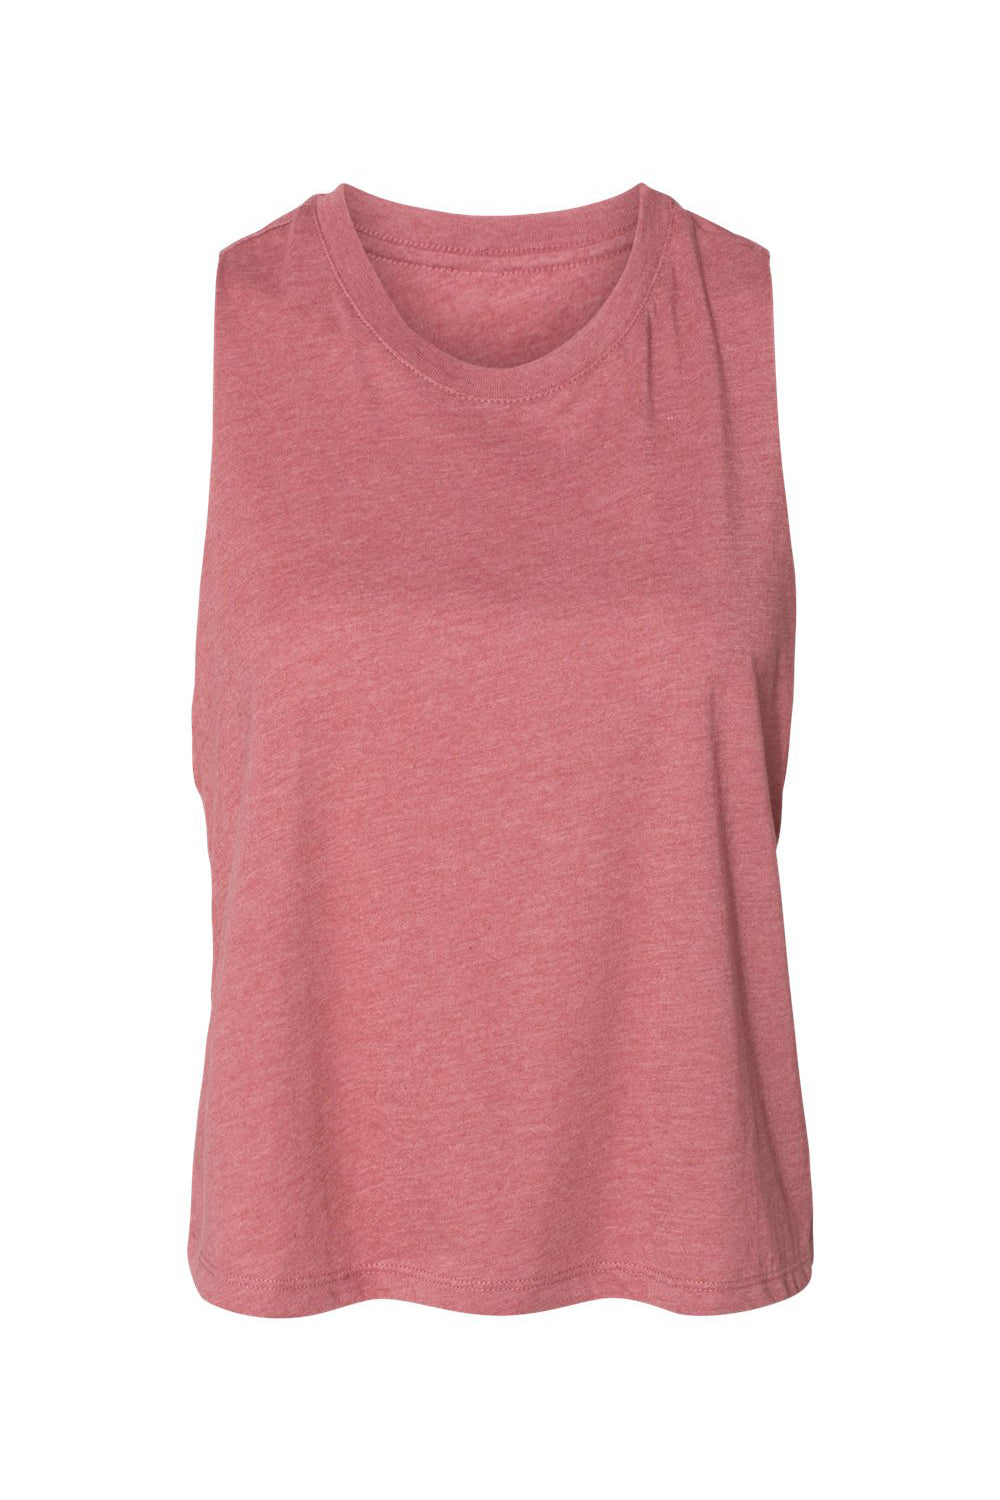 Bella + Canvas BC6682/6682 Womens Cropped Tank Top Heather Mauve Flat Front